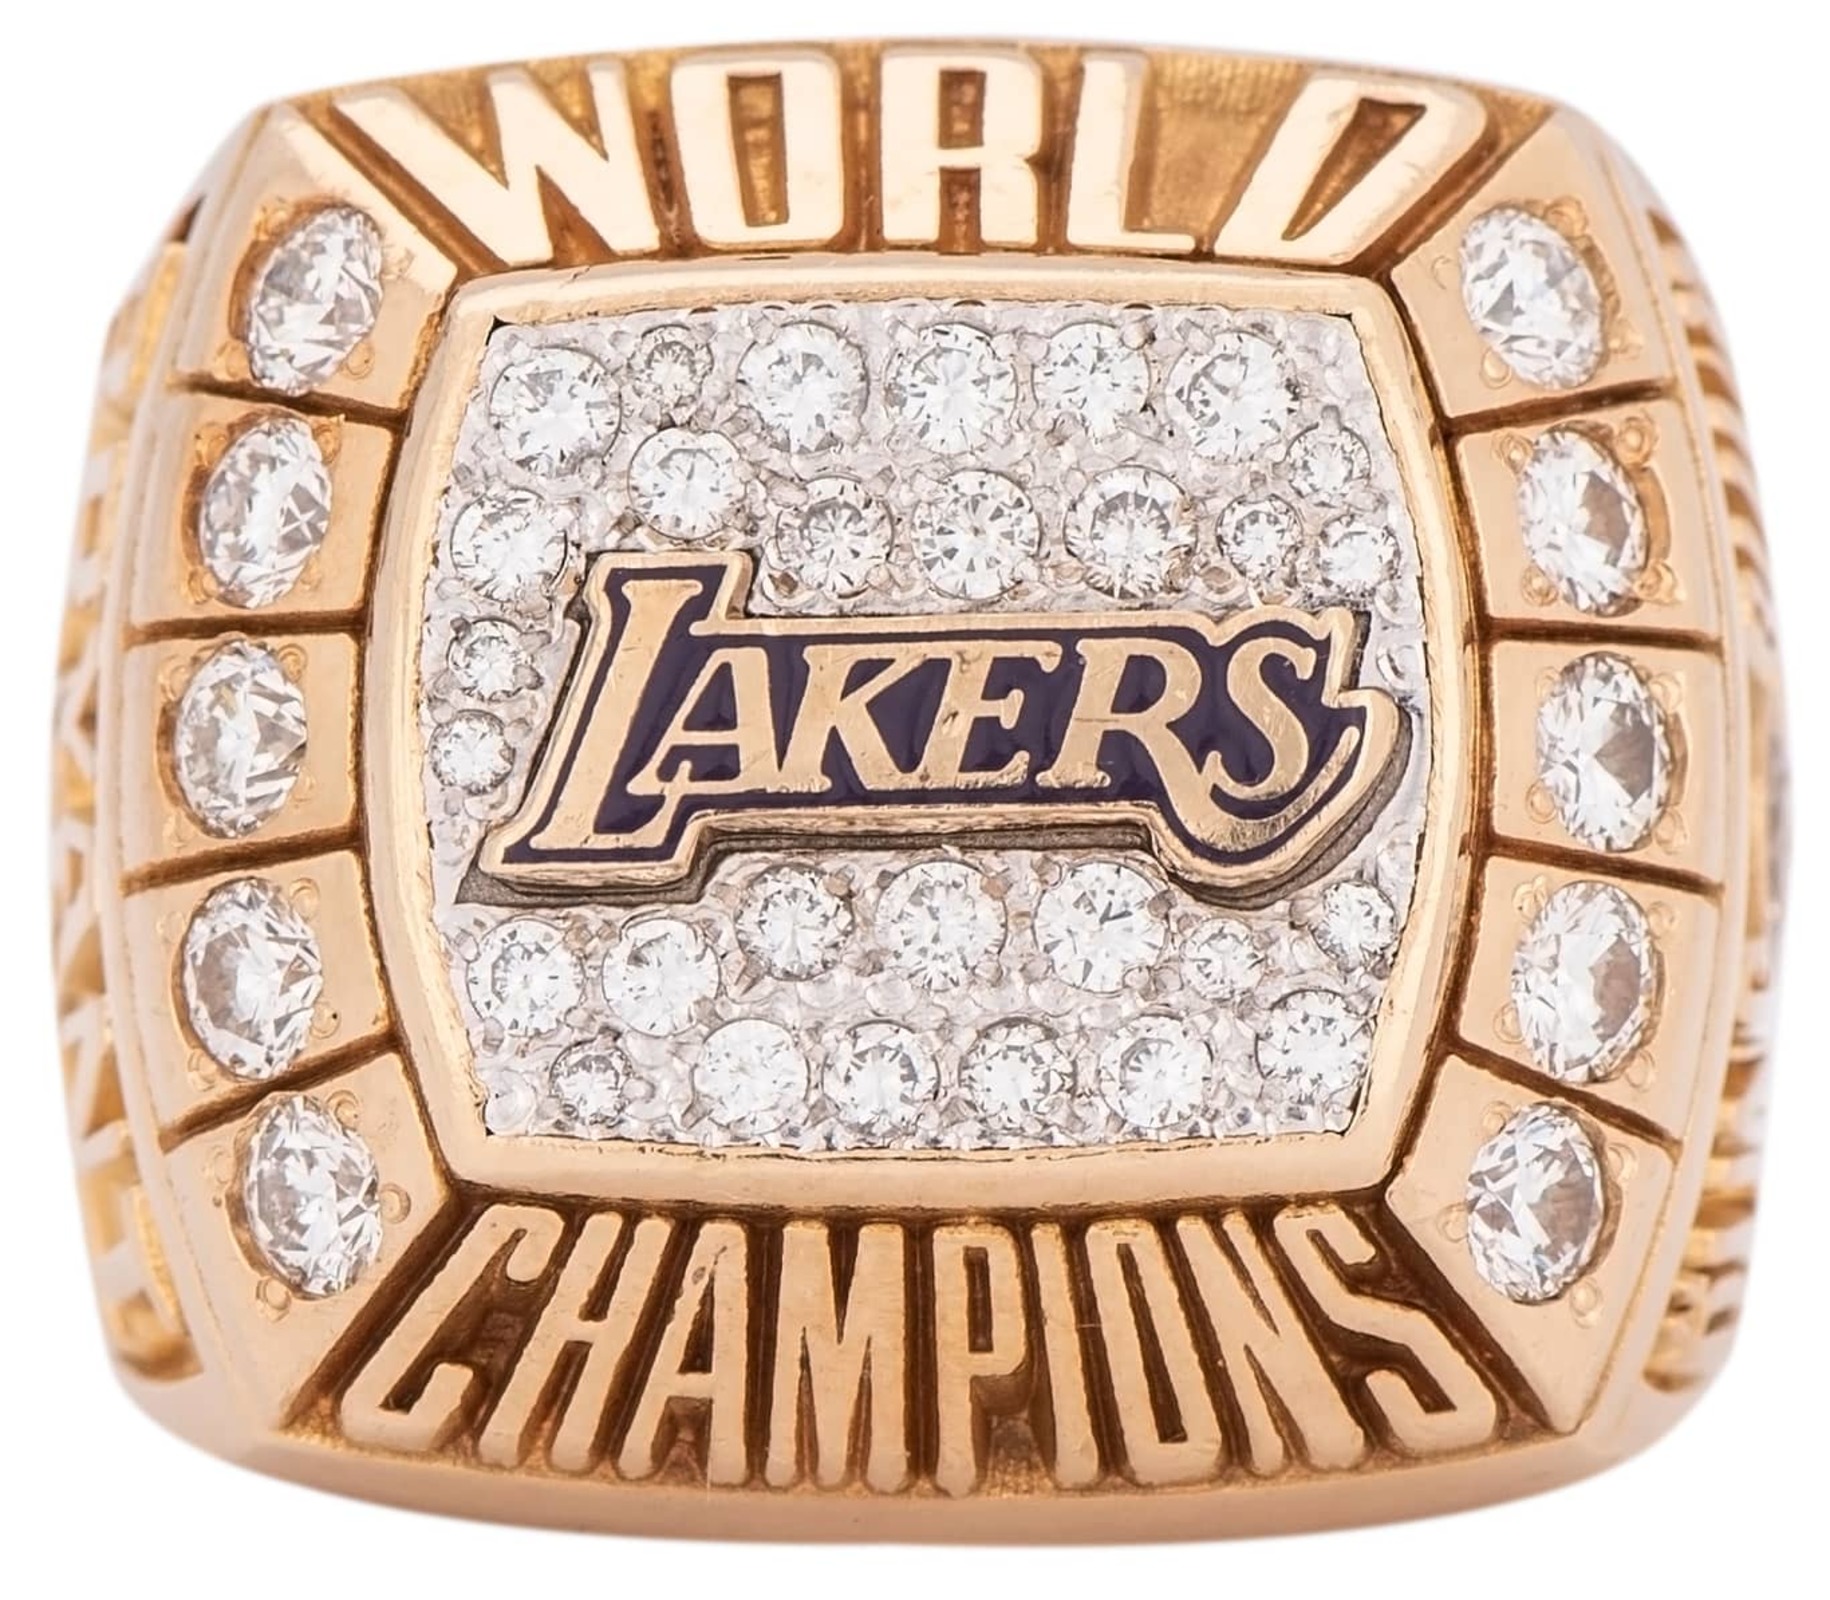 Replica championship ring Kobe Bryant gave to his father